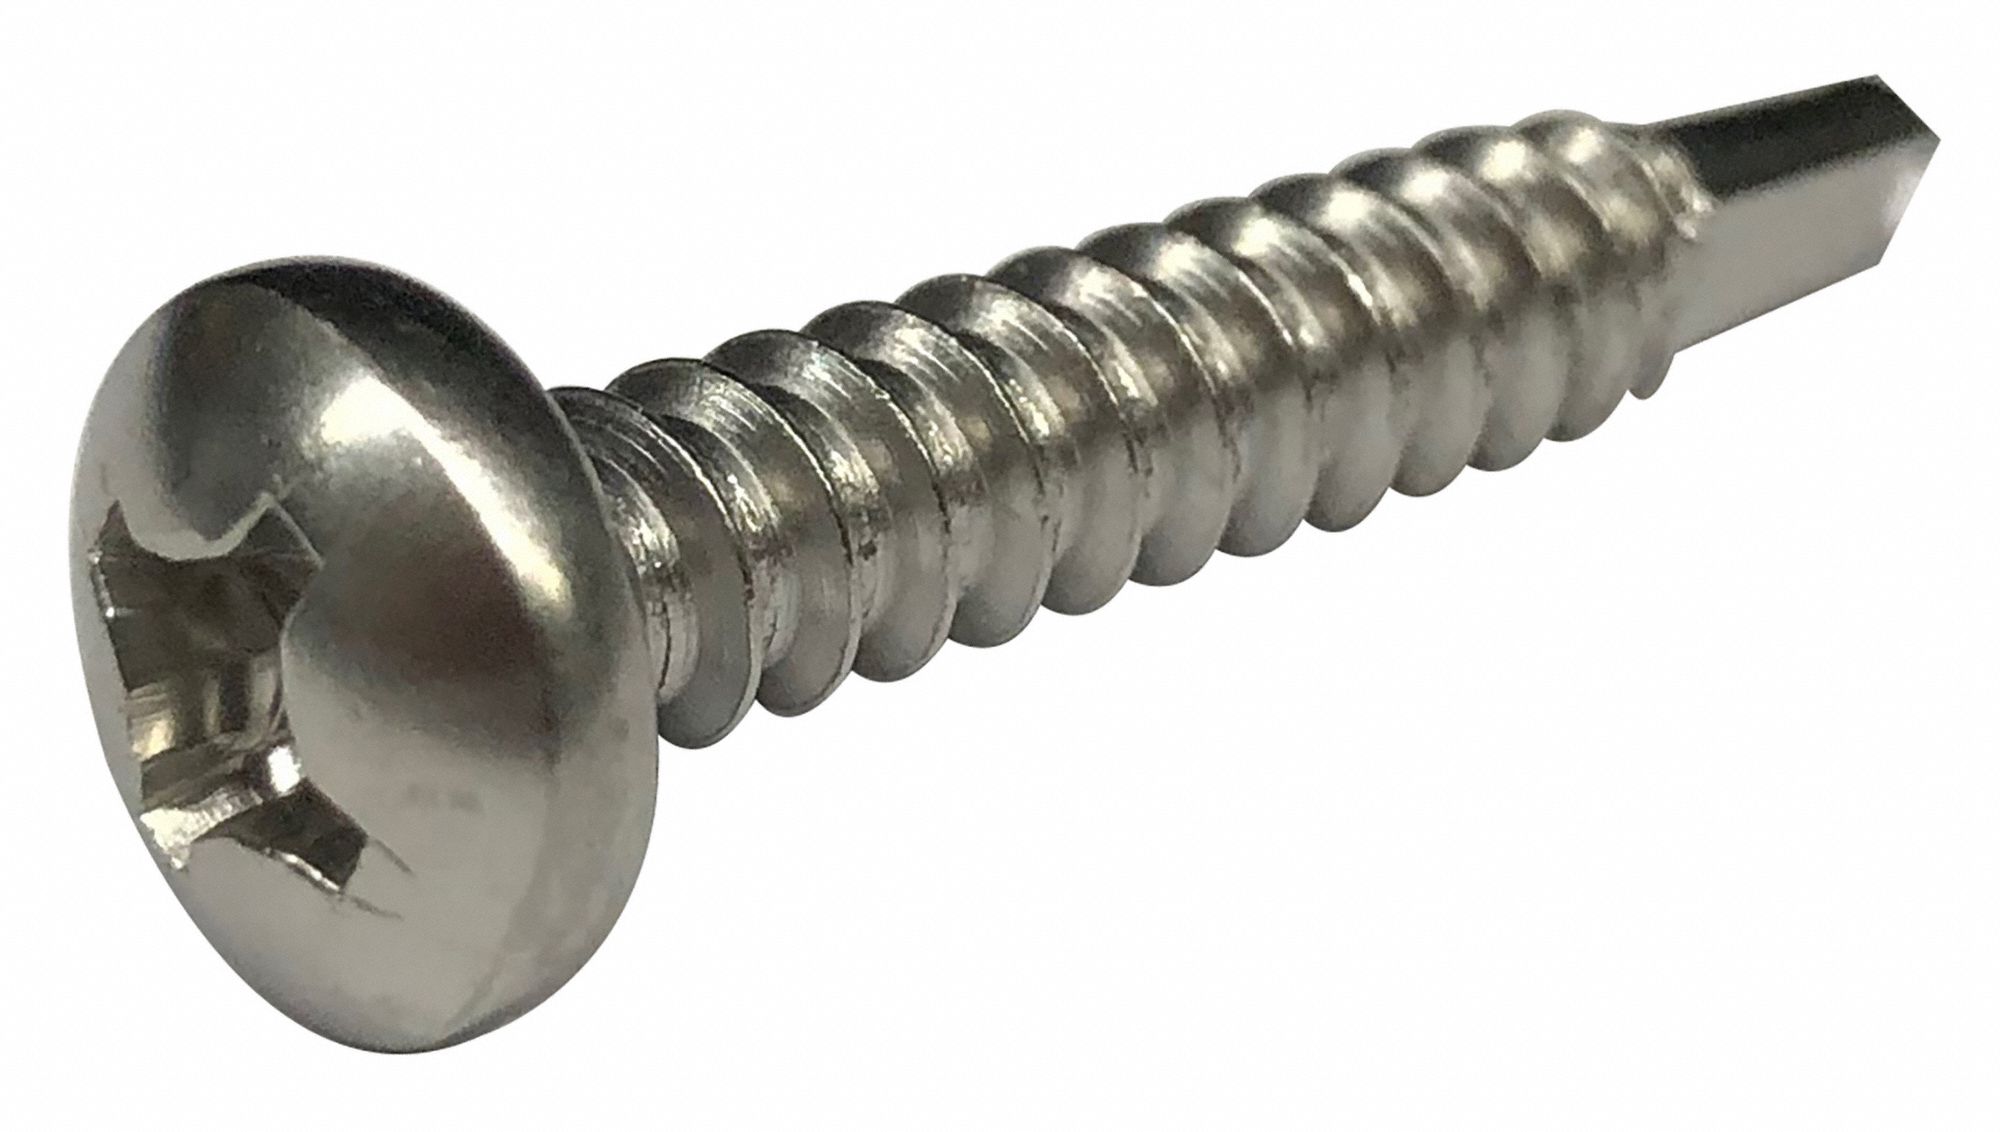 5/16-18 Thread Size Star Drive 2-1/4 Length Pack of 10 Pan Head Steel Thread Cutting Screw Type F Zinc Plated Finish 